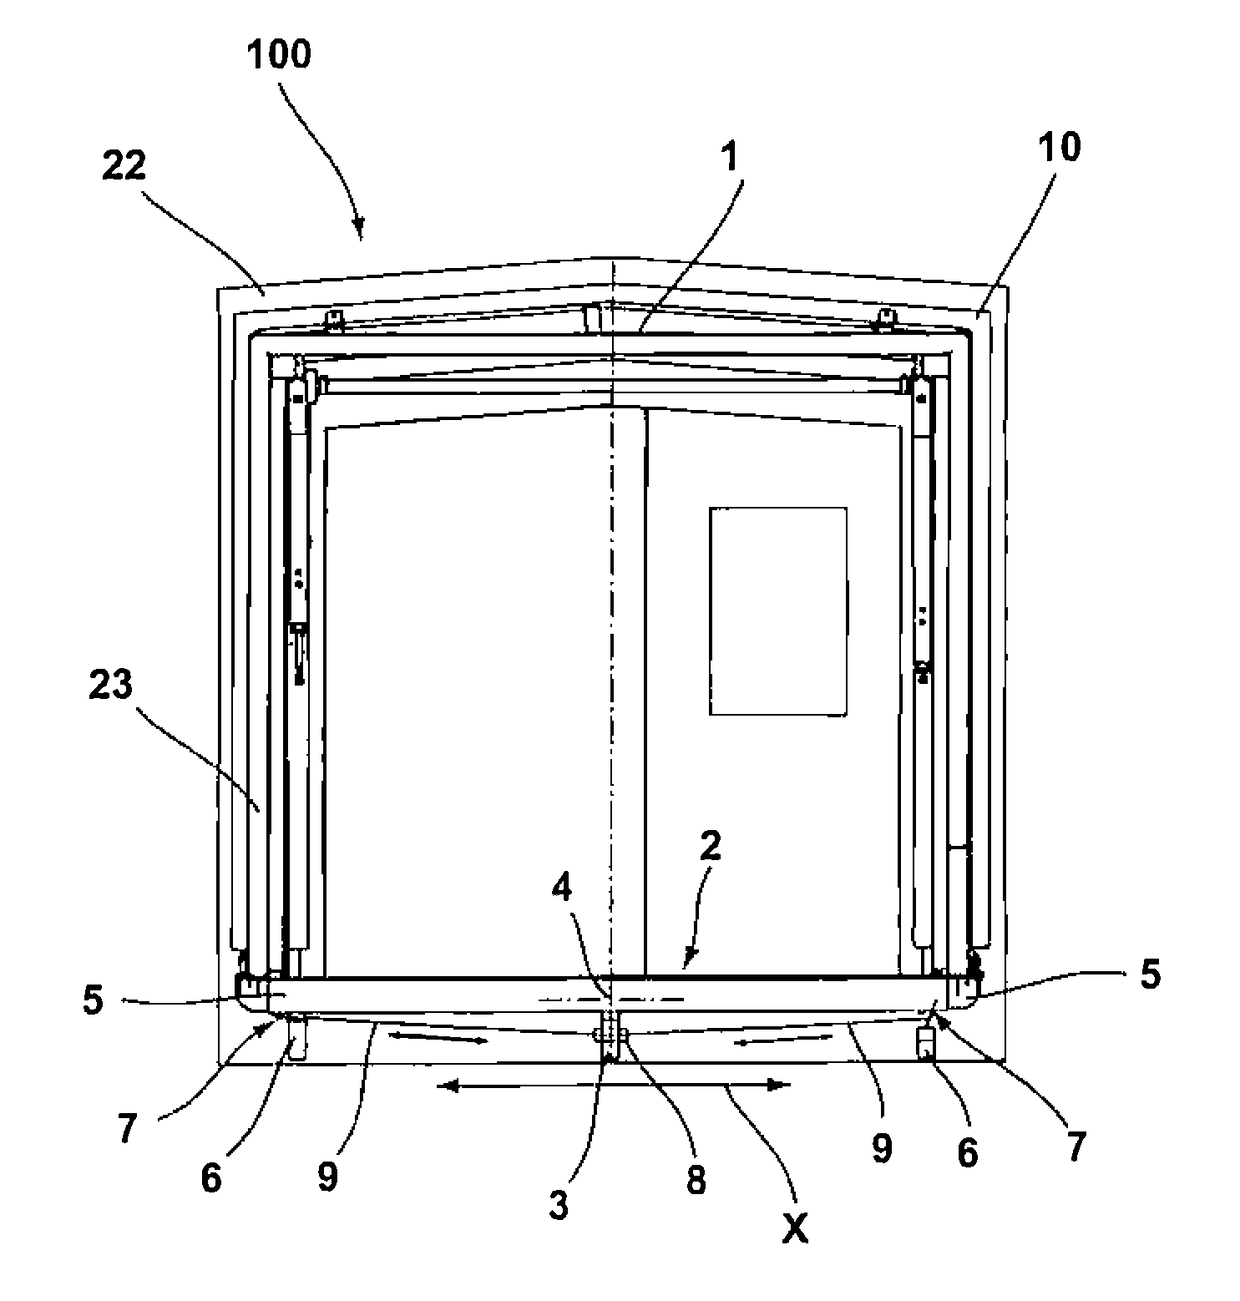 Coupling module for forming an interface between the cabin of a passenger bridge and an airplane